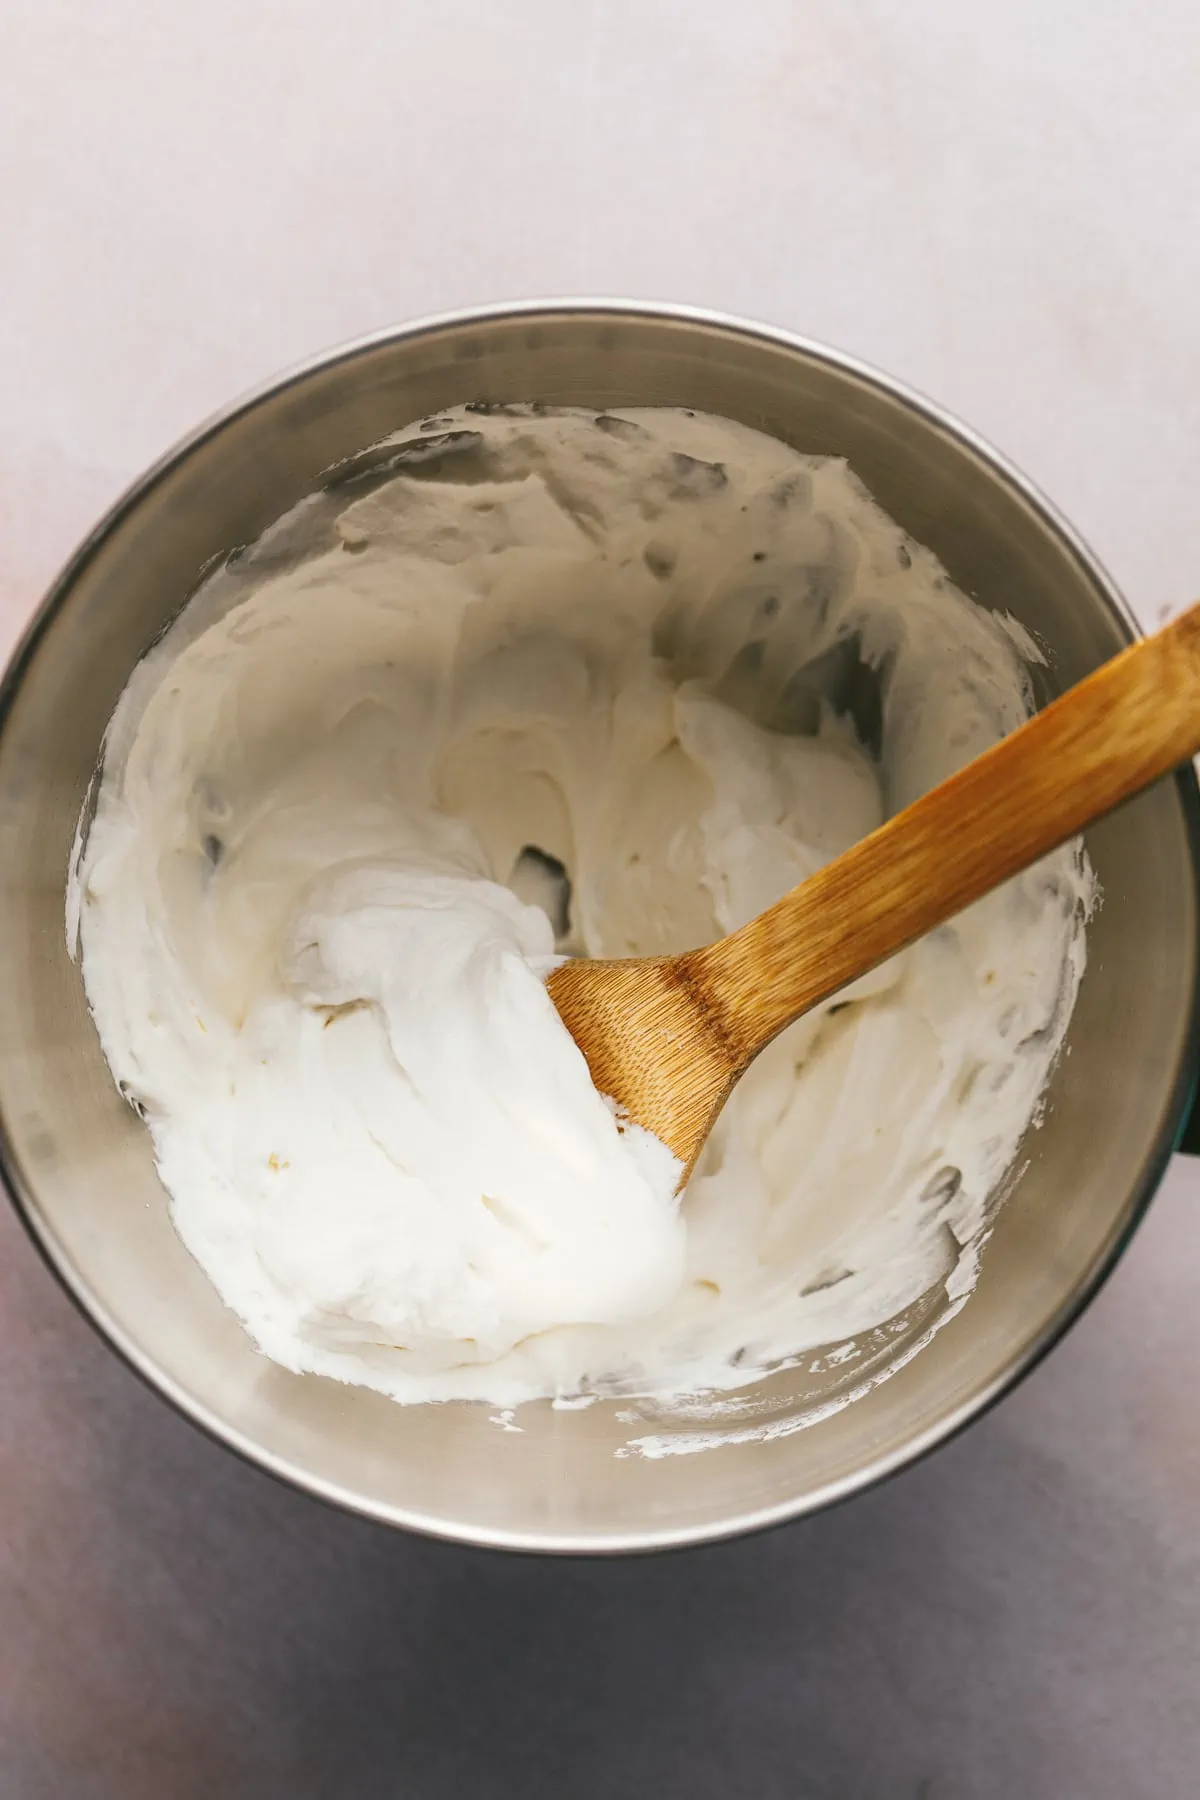 Sugar free whipped cream in a large mixing bowl with a wooden spoon.